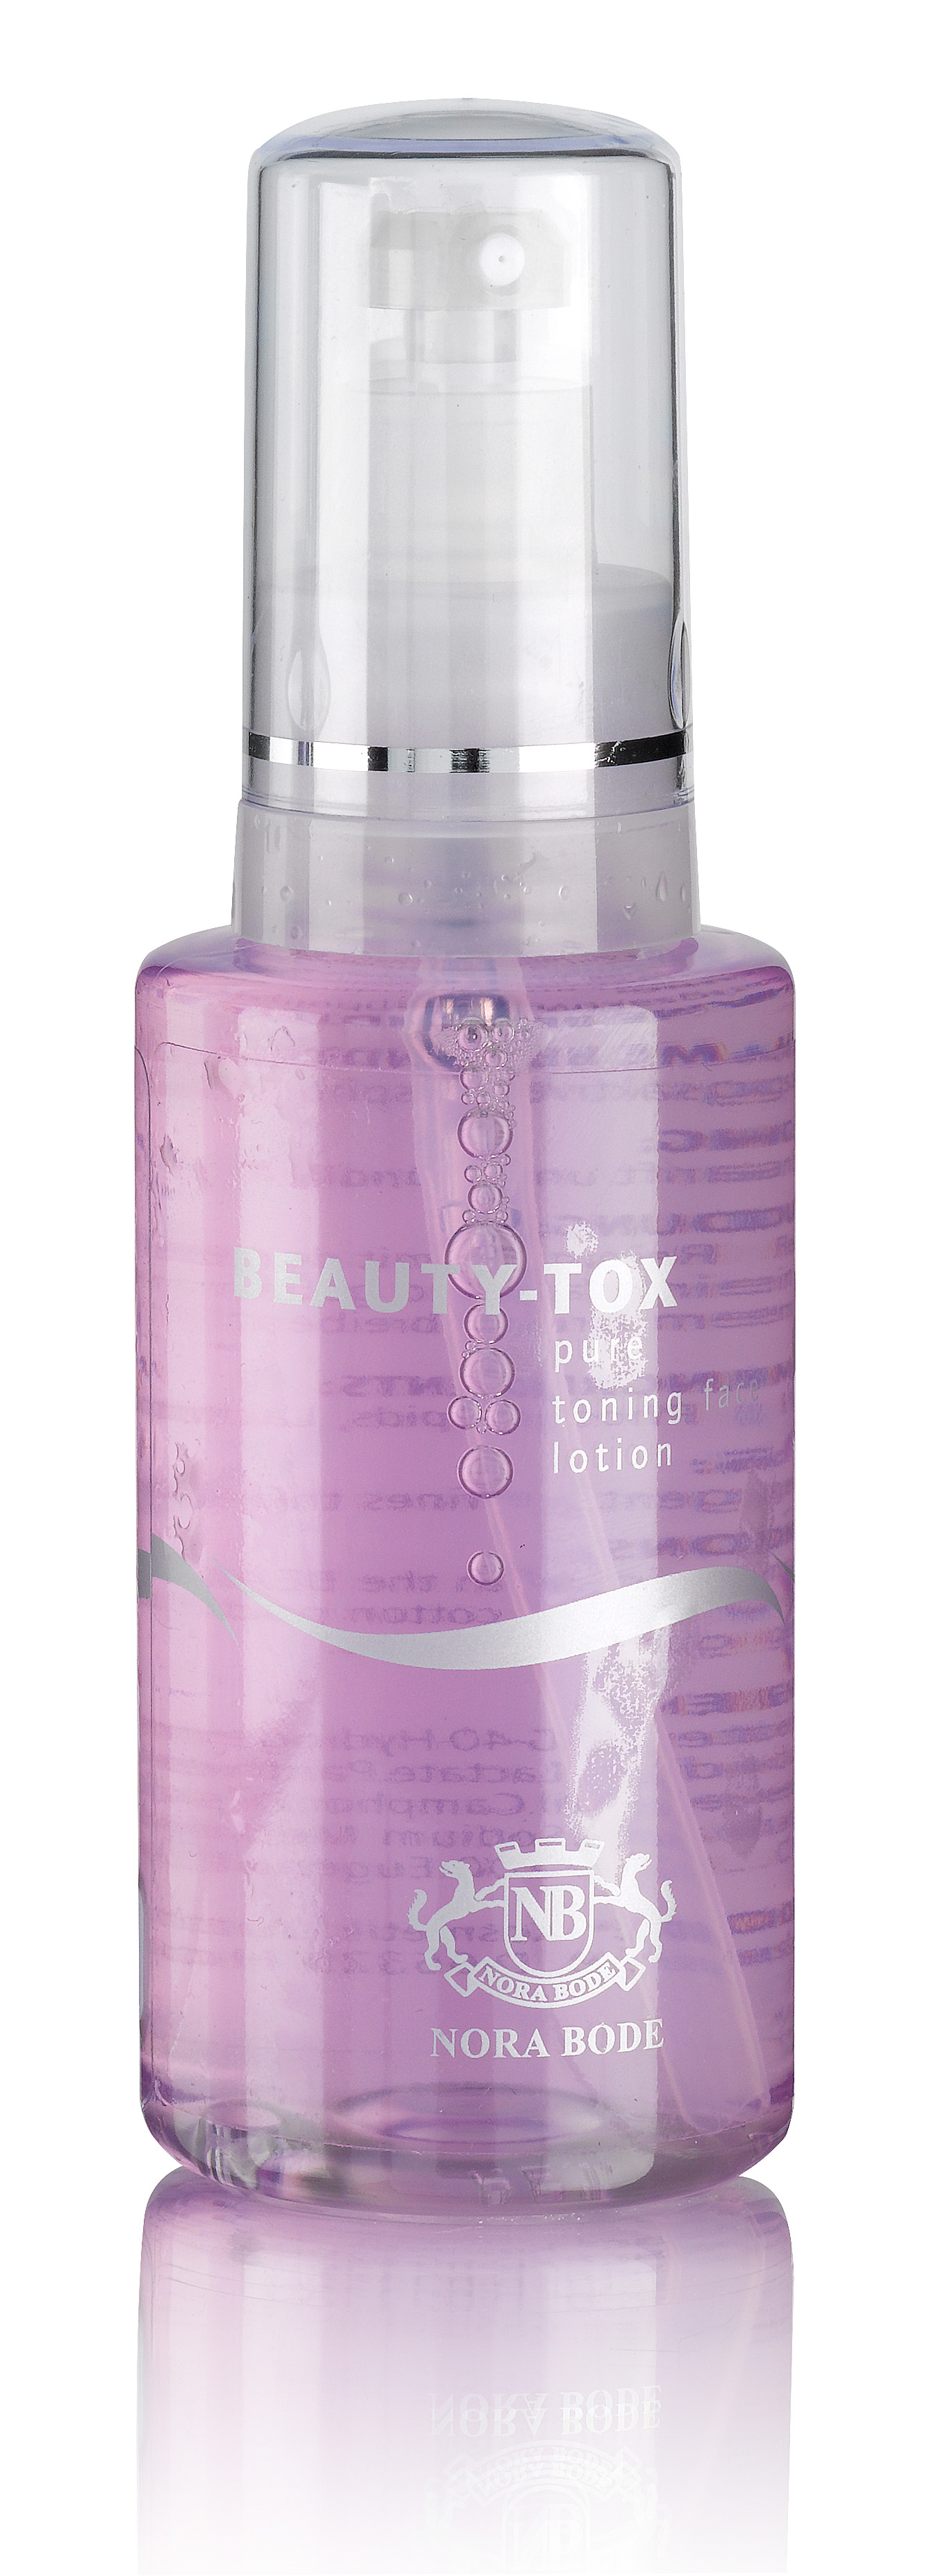 beauty-tox_pure toning face lotion